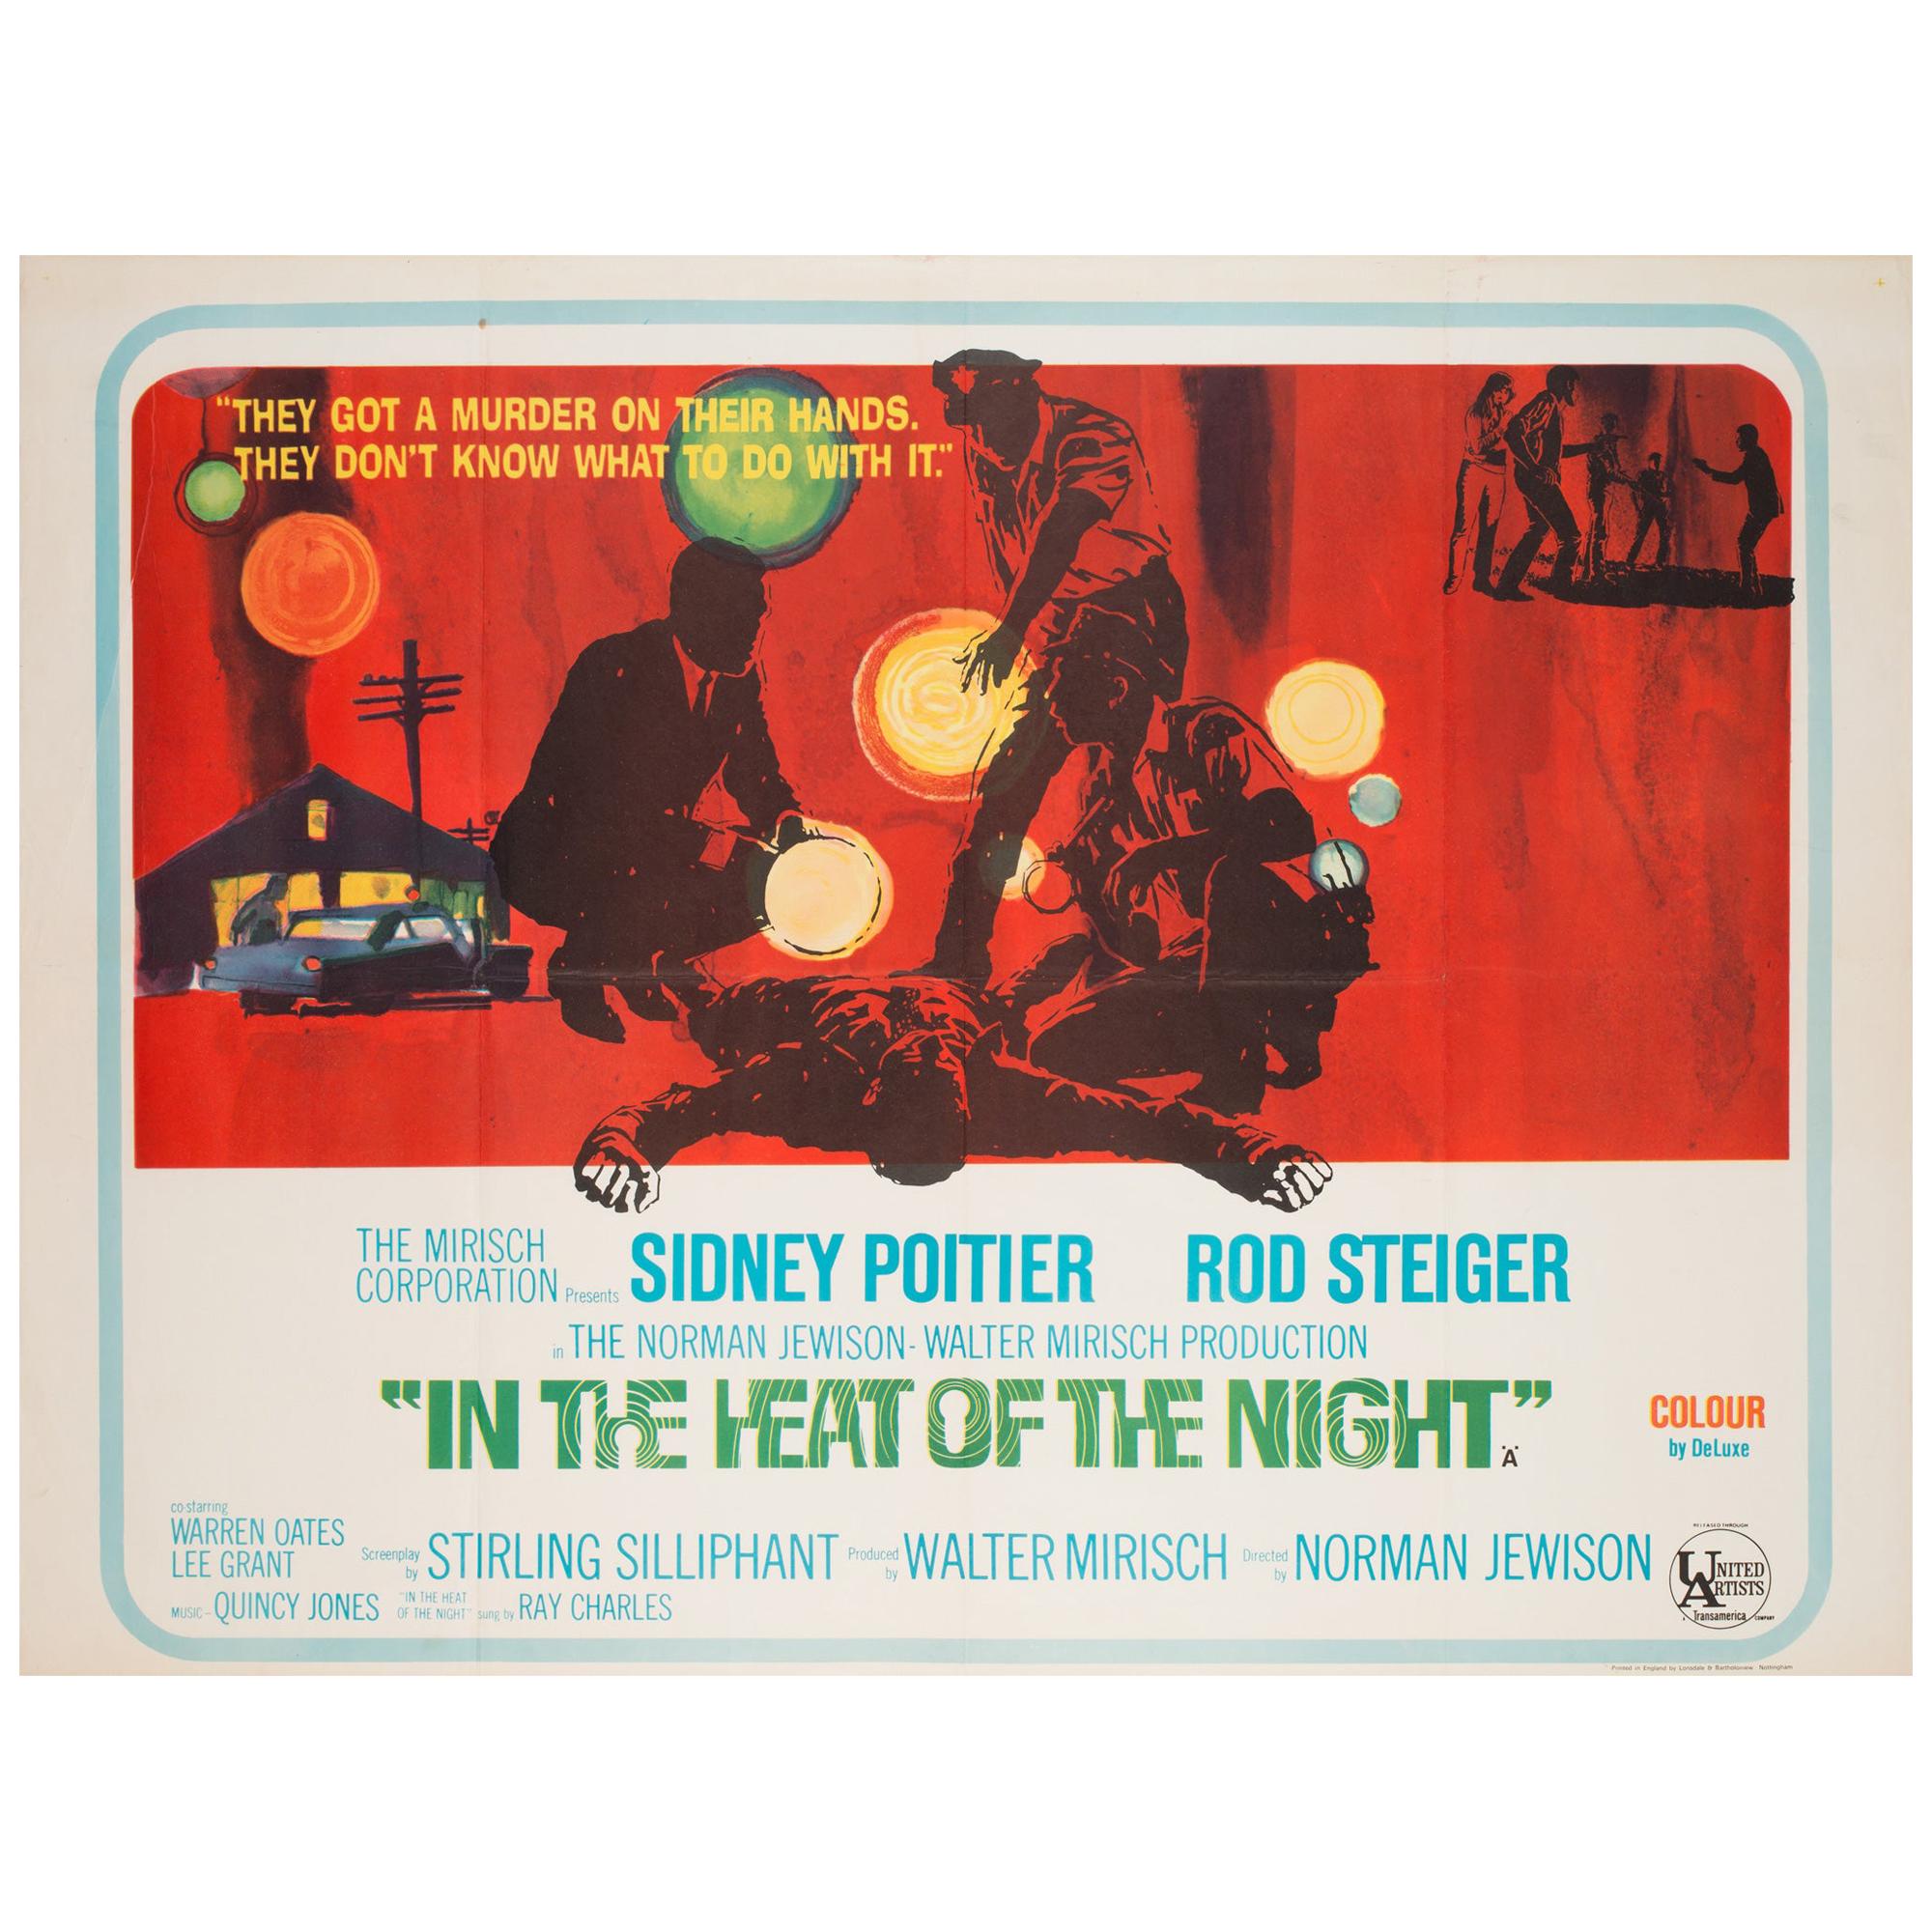 Suitably dark, artwork that features on this vintage film poster for Norman Jewison's gritty movie 
In the Heat of the Night. It works particularly well on the British quad.

Will be sent folded as originally issued. In excellent/near mint